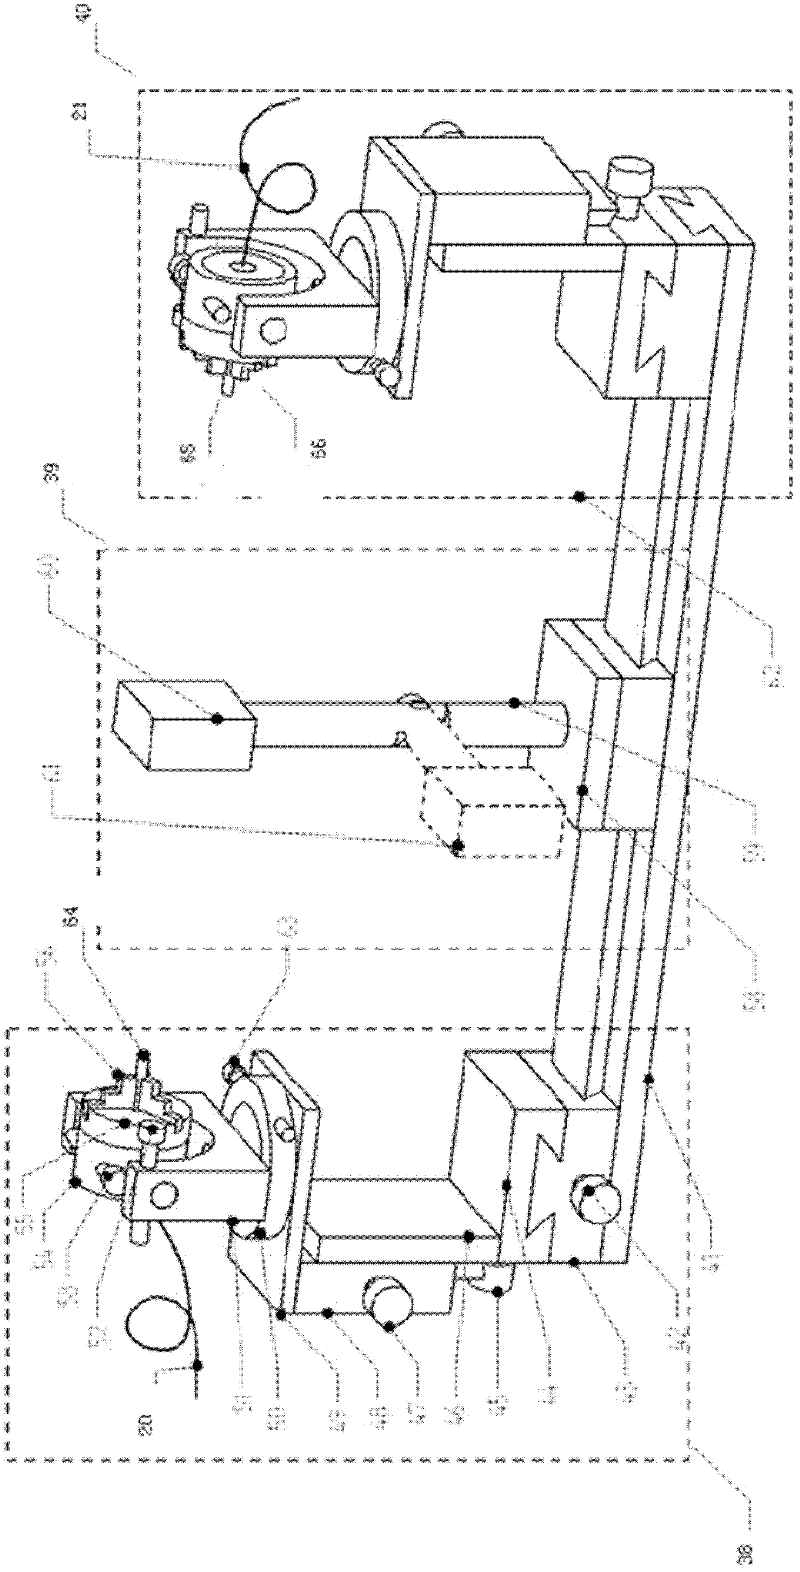 Space adjustment mechanism for aligning polarization-maintaining fiber collimators, device and alignment method thereof